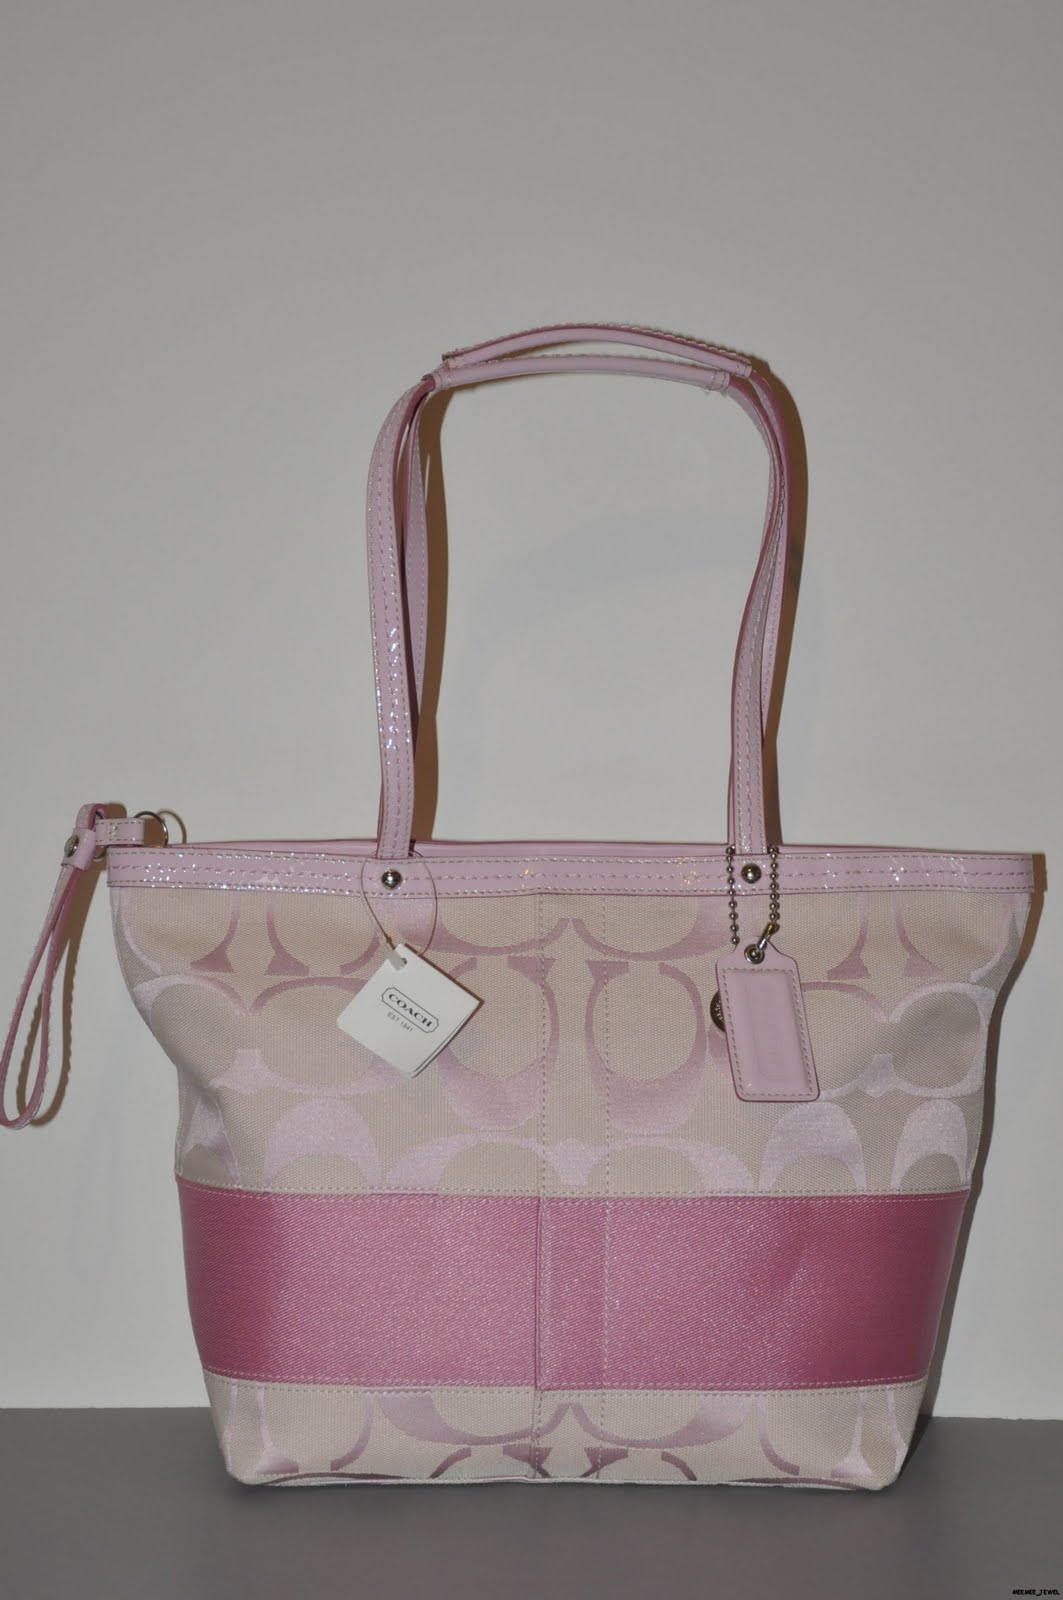 GreenApple4sale: Authentic Branded Bags: Coach Signature Stripe Light Pink 13548